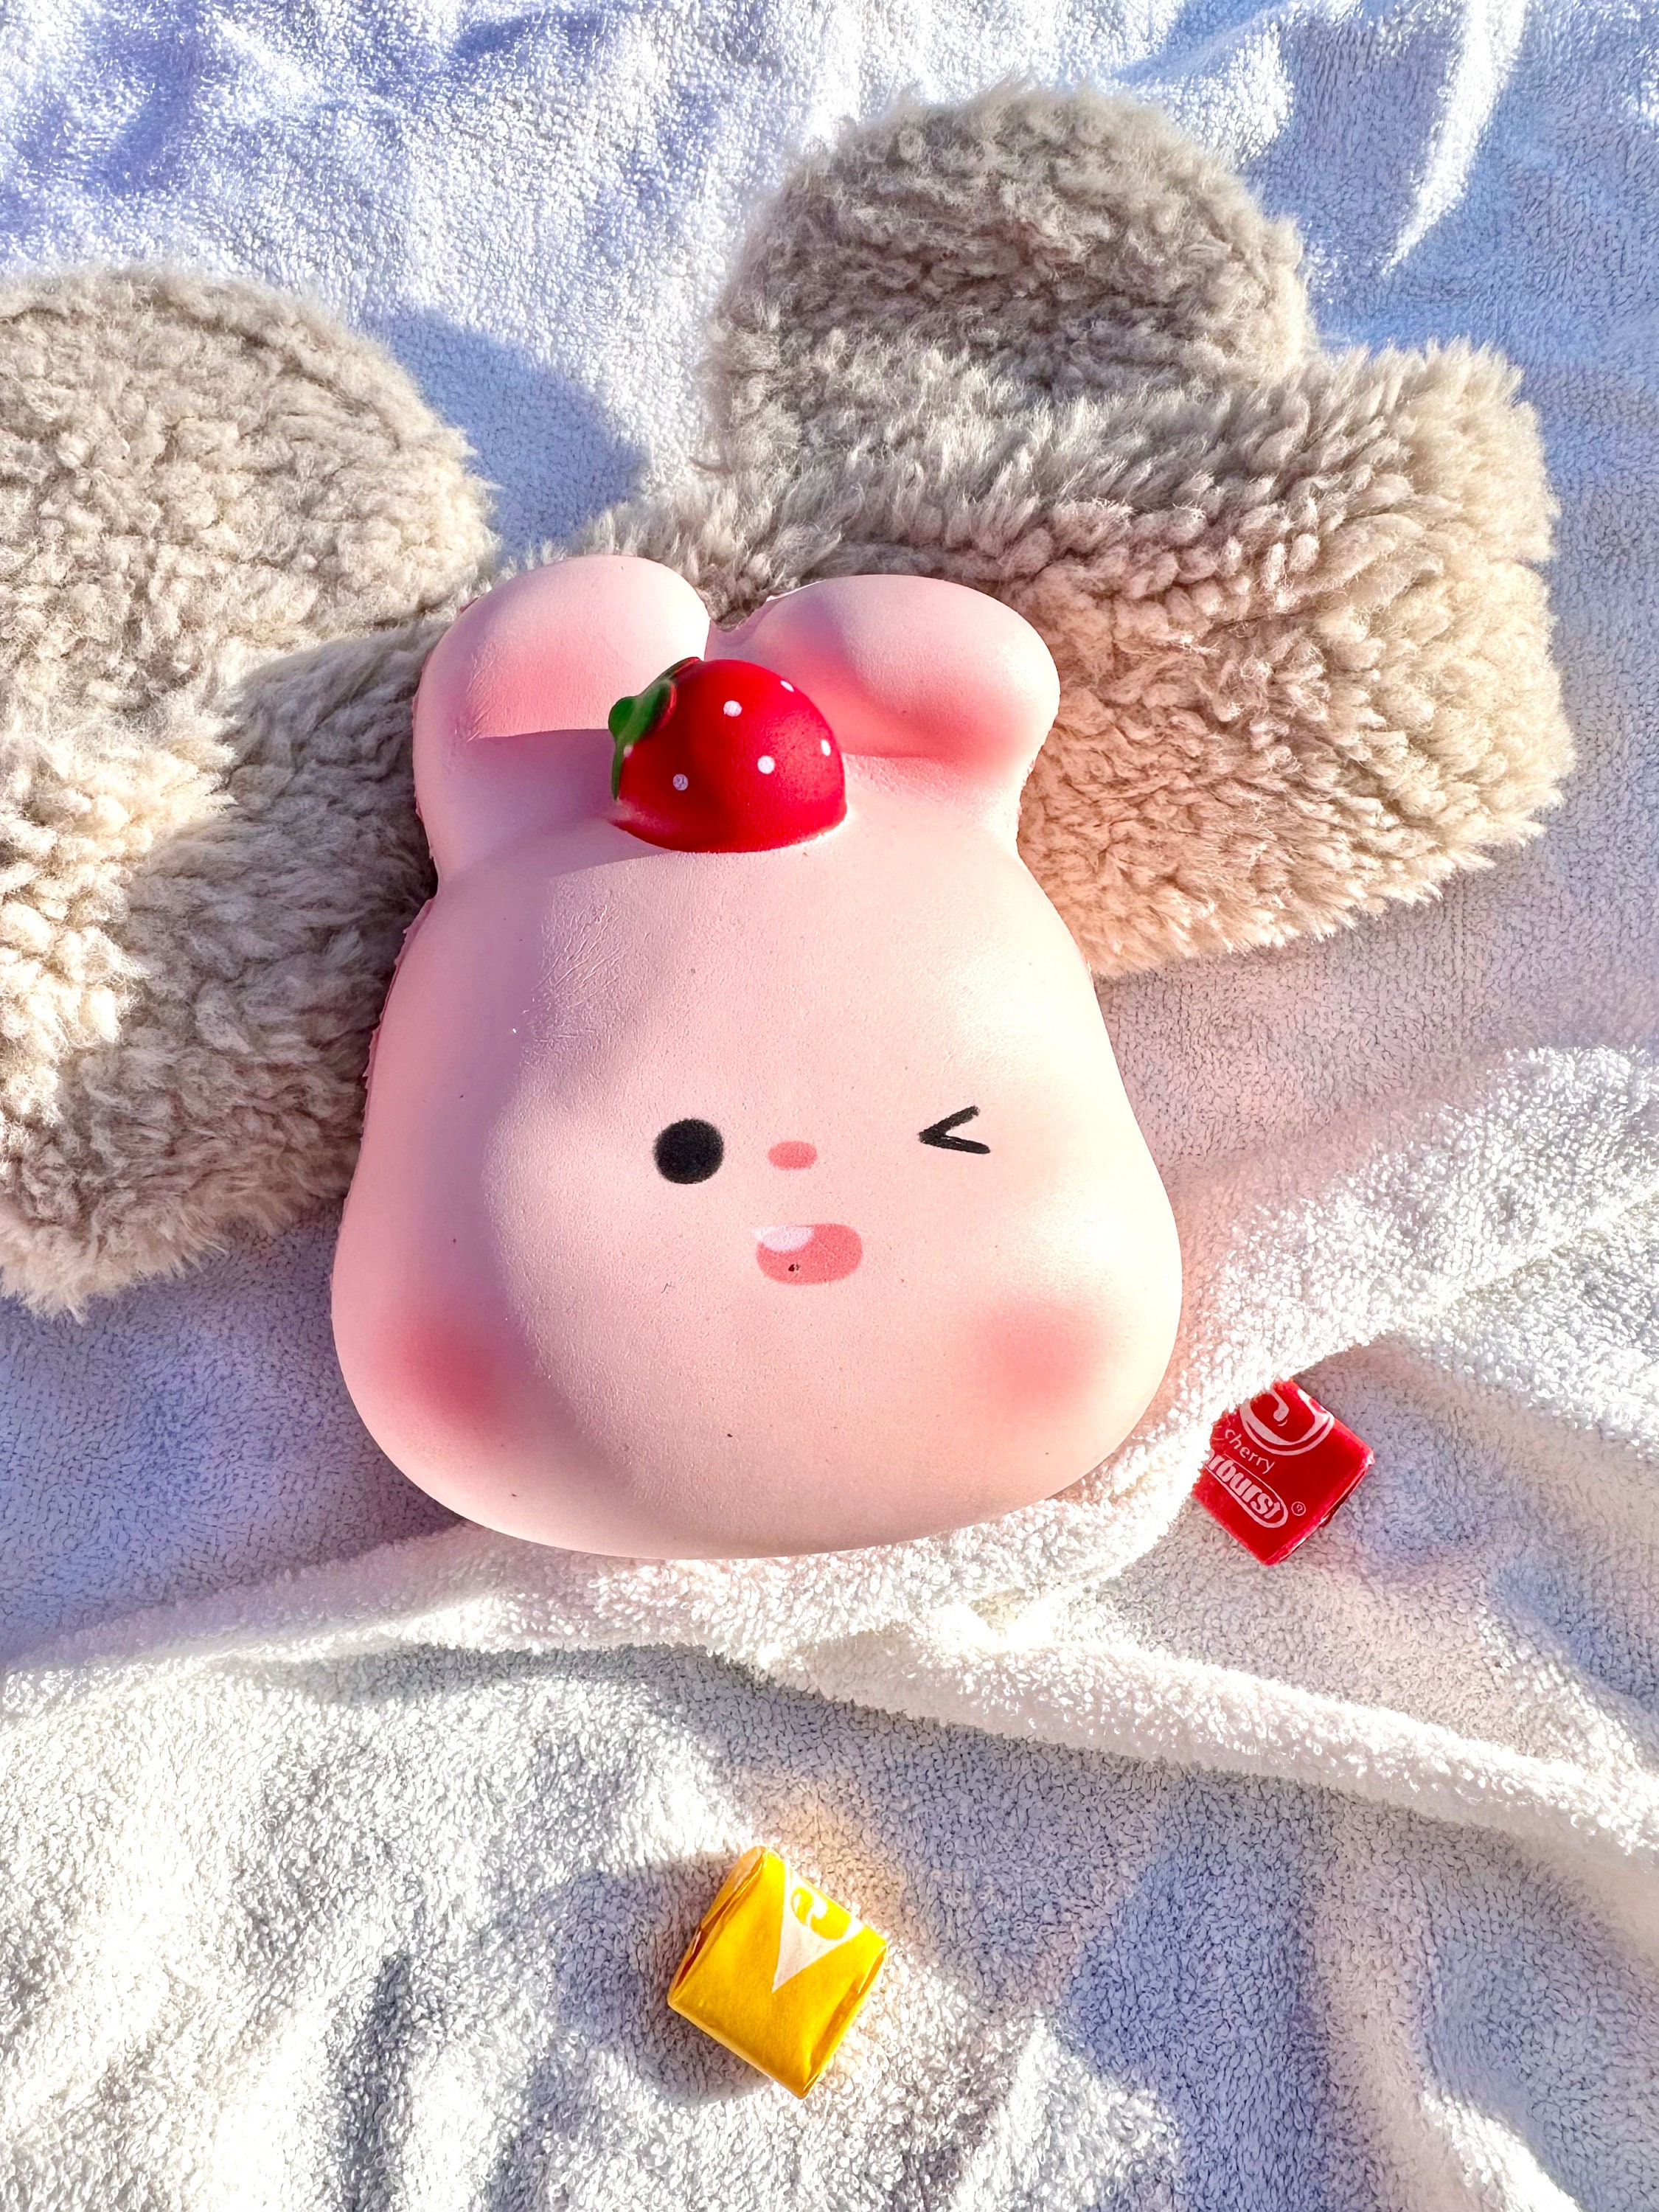 Kawaii Squishy Pink Bunny Fidget Toy Stress Reliever for All Ages 